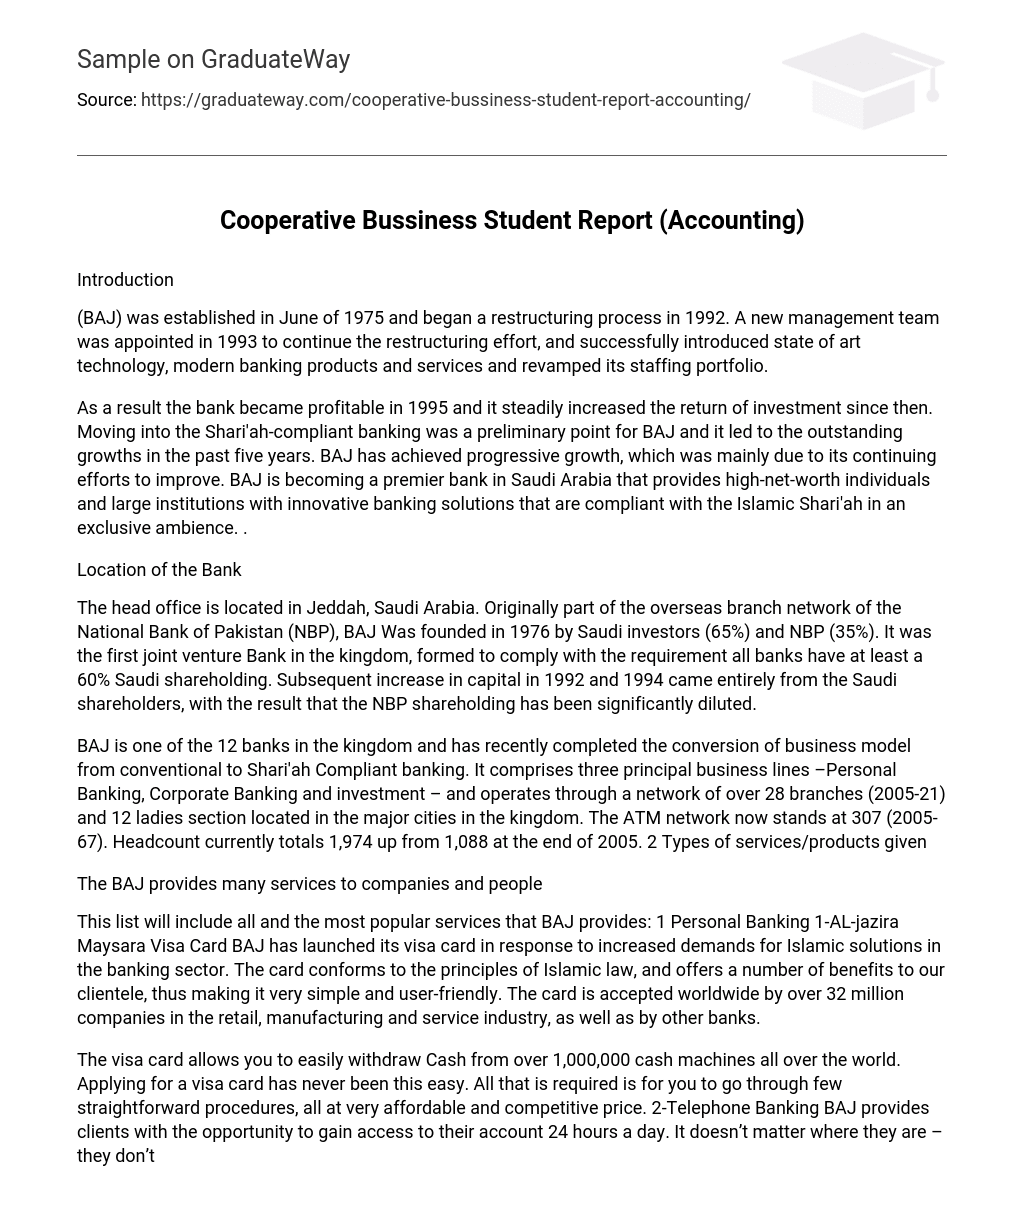 Cooperative Bussiness Student Report (Accounting)